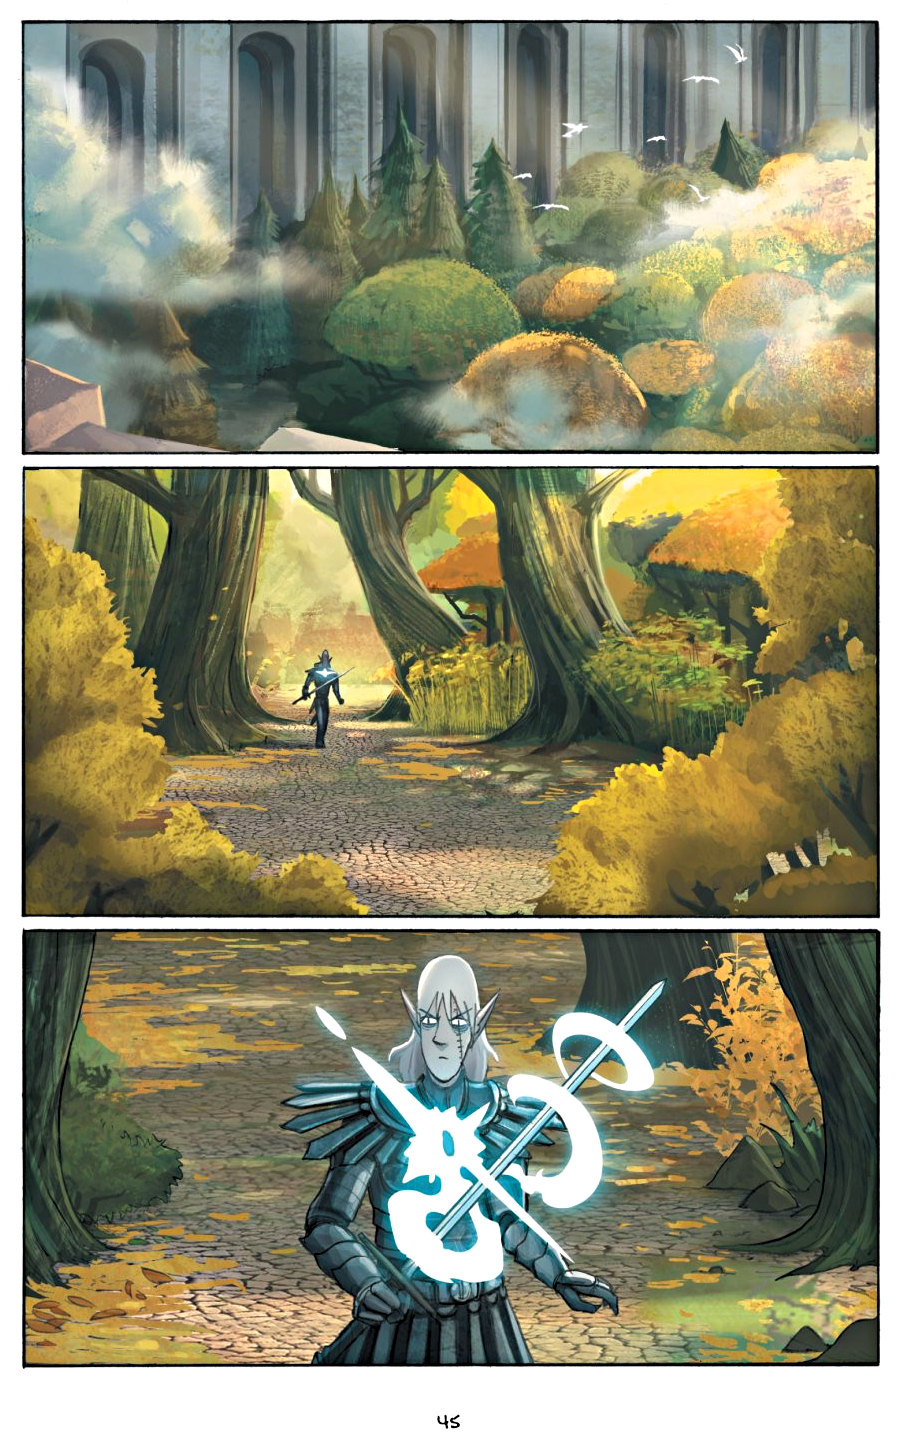 page 45 of amulet 5 prince of the elves graphic novel